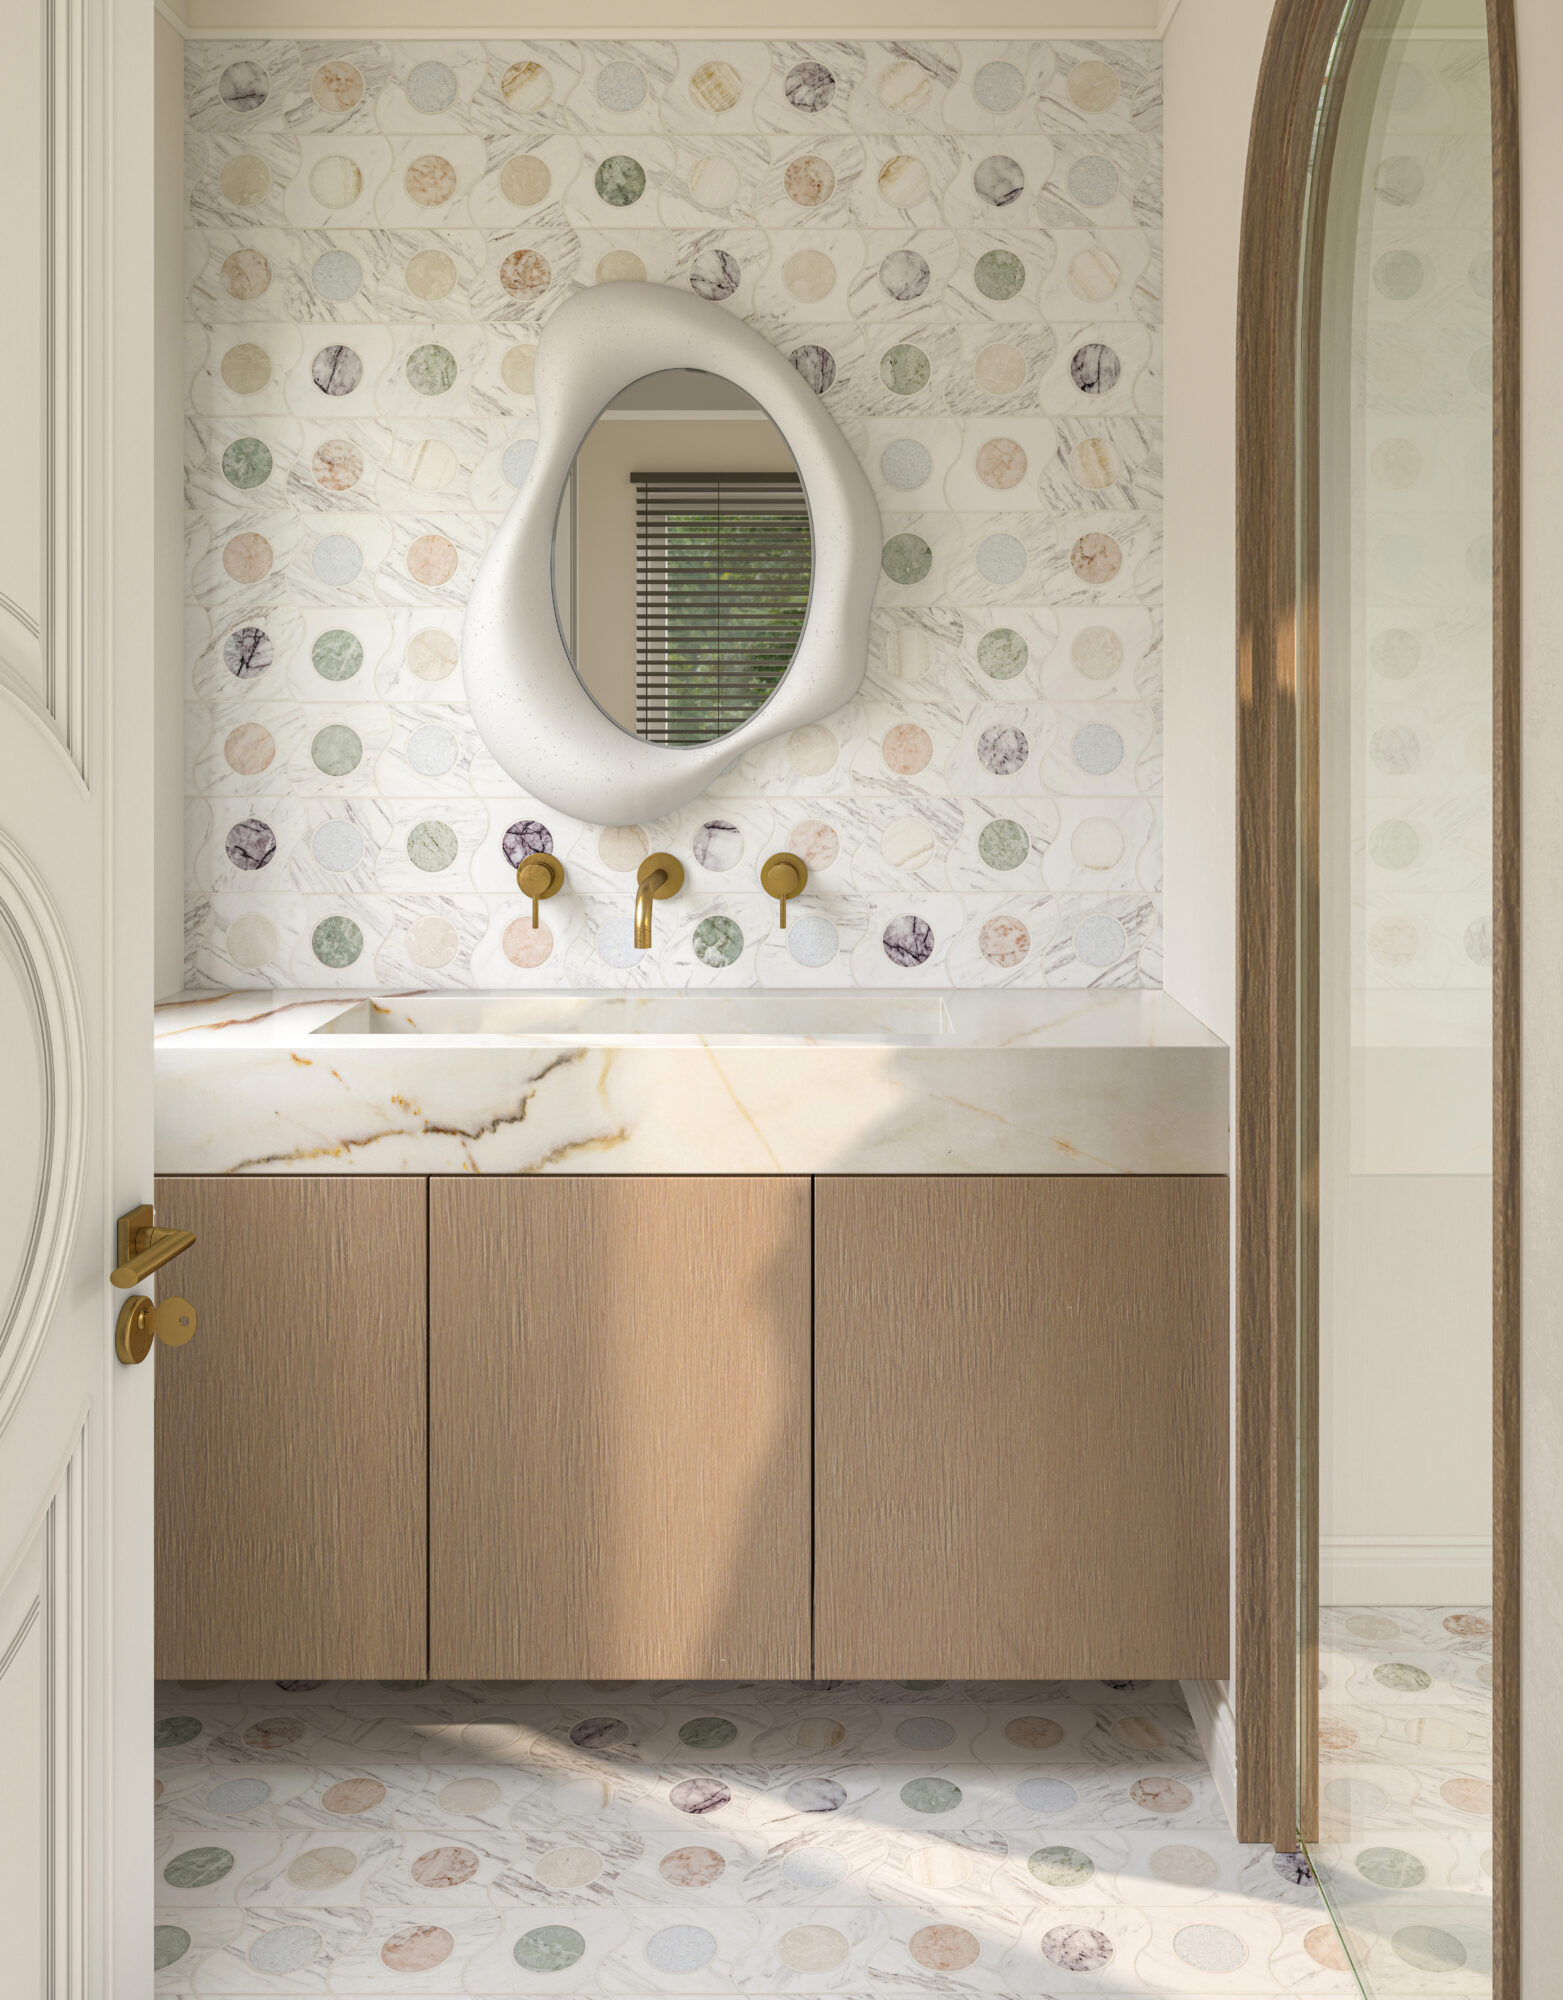 polka dot tile in a bathroom is one of many kitchen and bath trends this spring